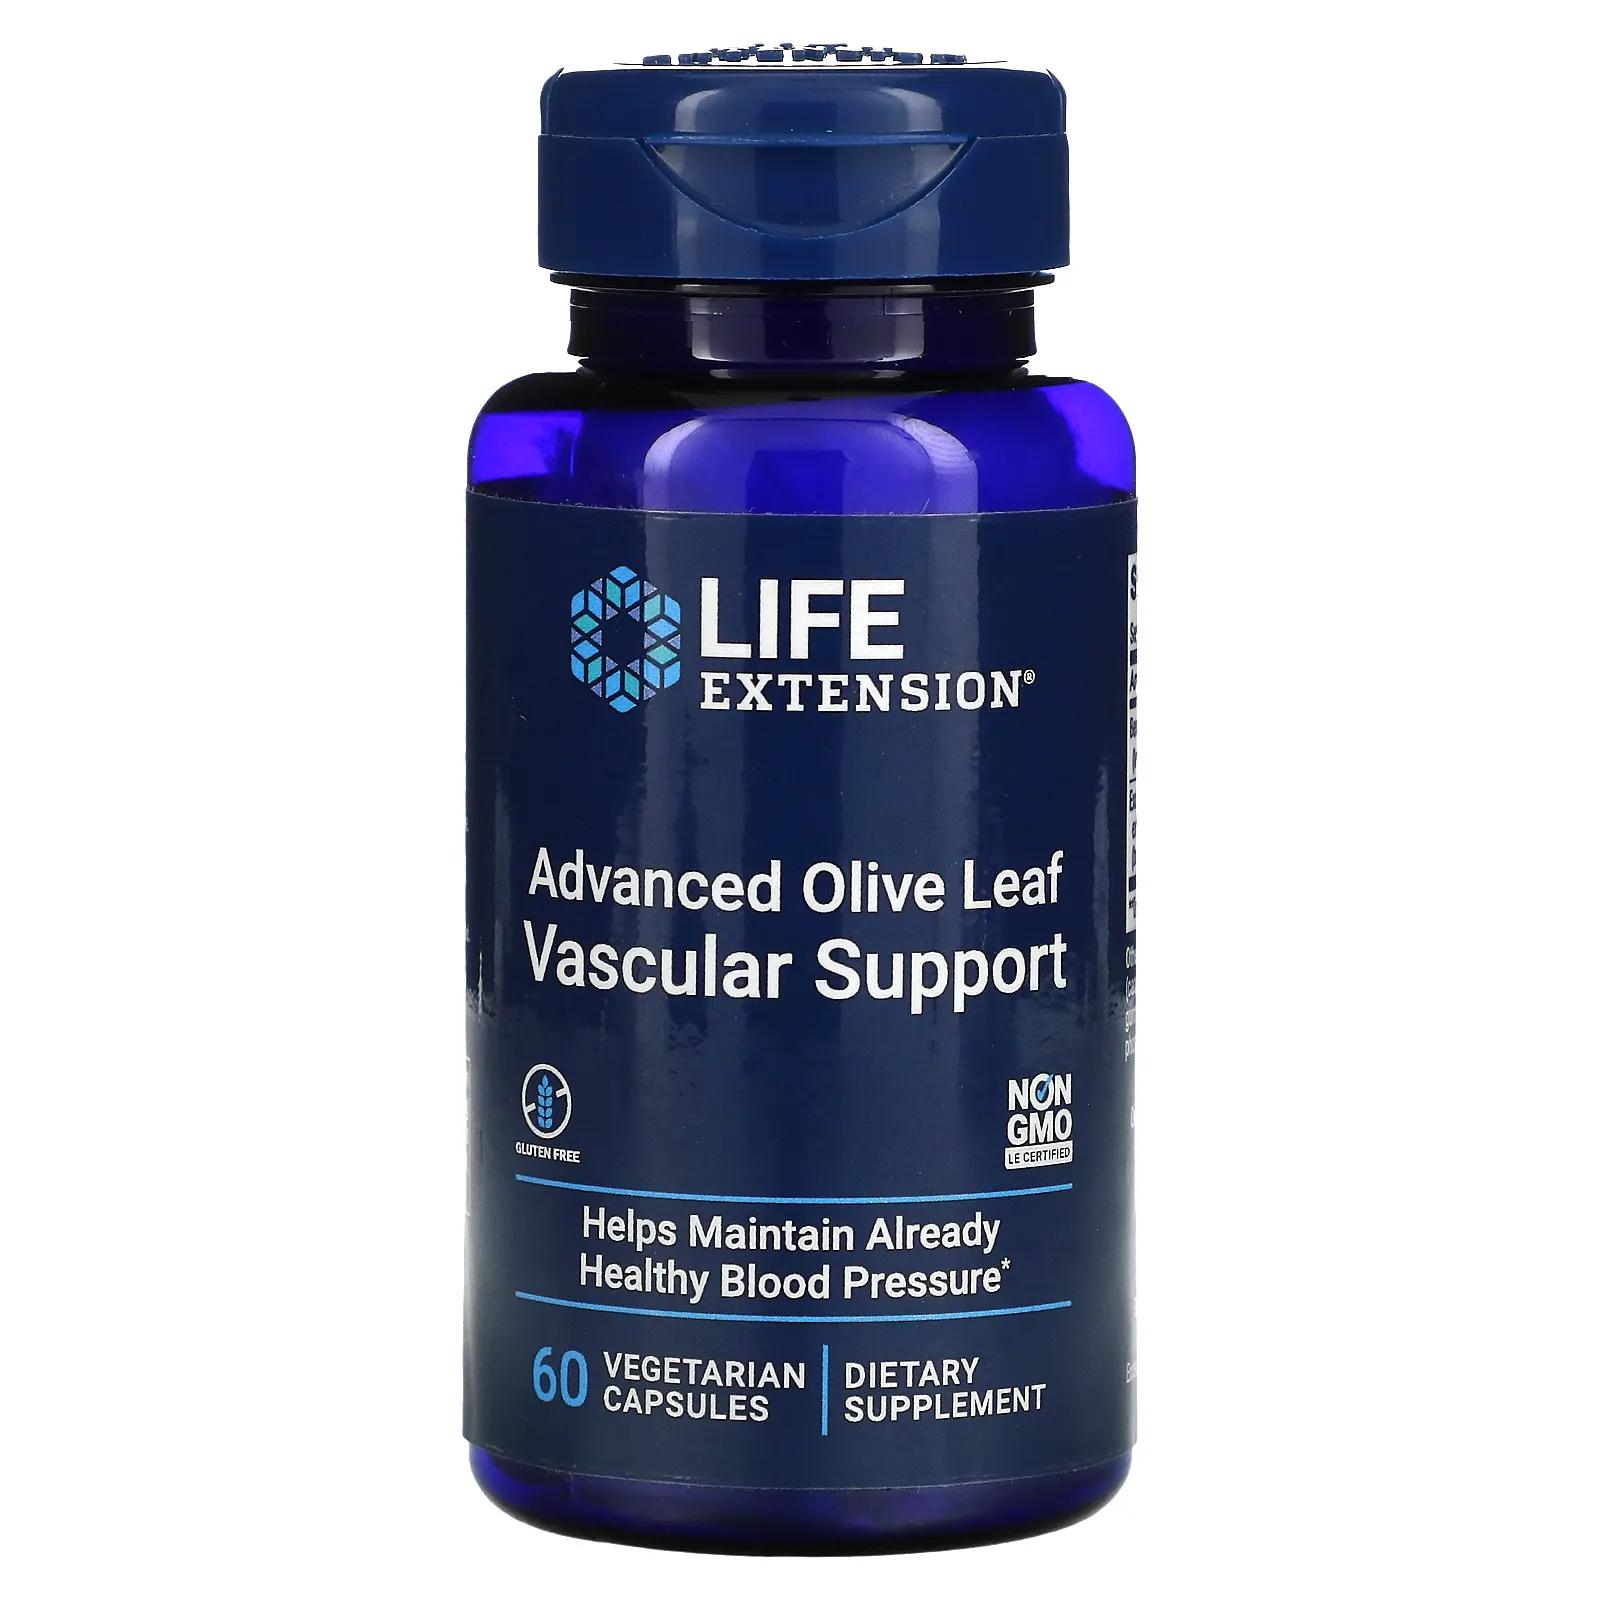 Life Extension Advanced Olive Leaf Vascular Support with Celery Seed Extract 60 Veggie Caps life extension advanced olive leaf vascular support with celery seed extract 60 veggie caps